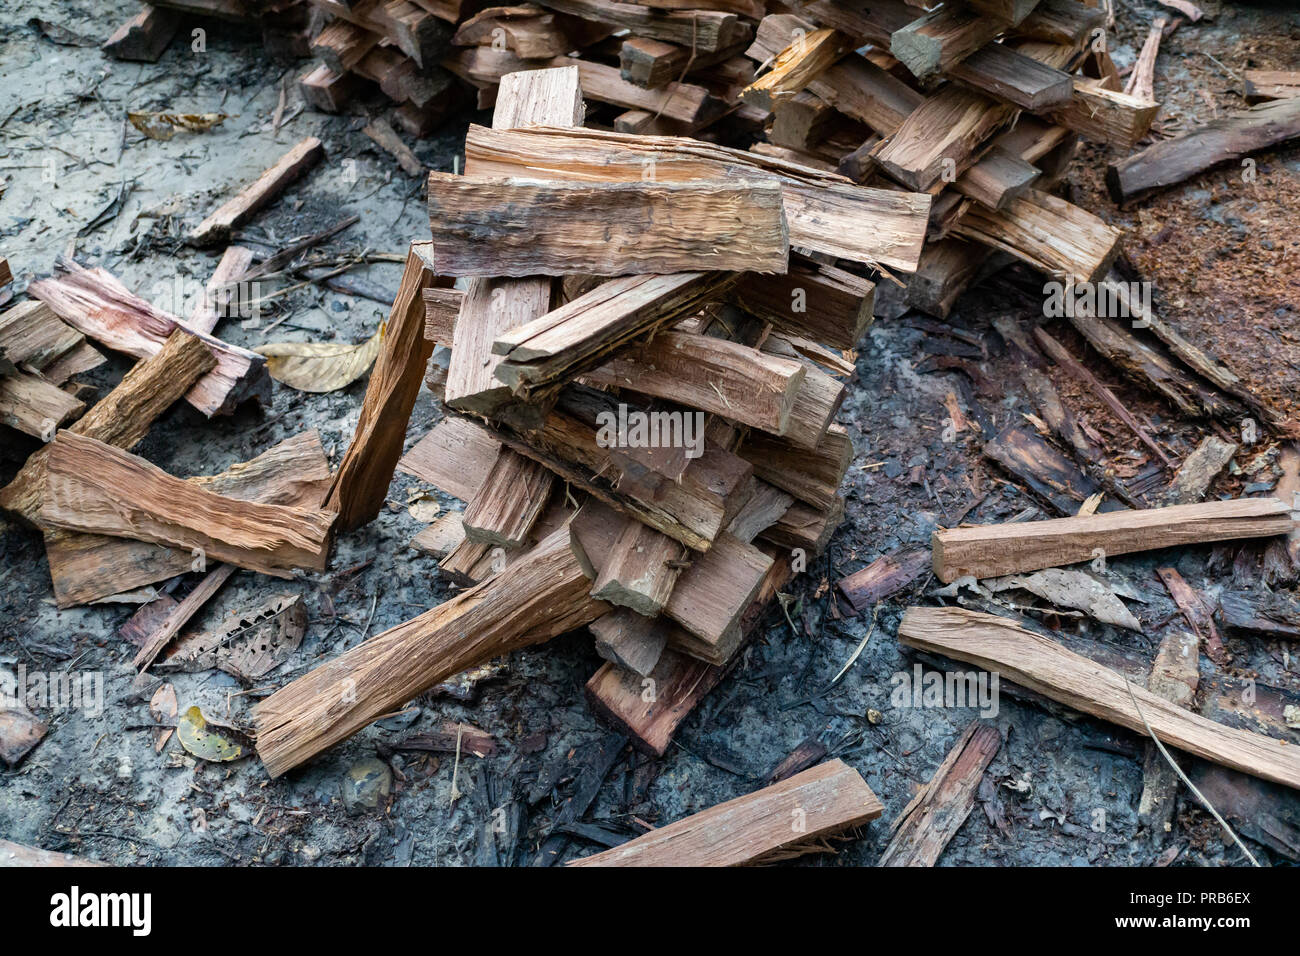 A pile of firewood on the ground. Freshly chopped wooden logs. Stock Photo